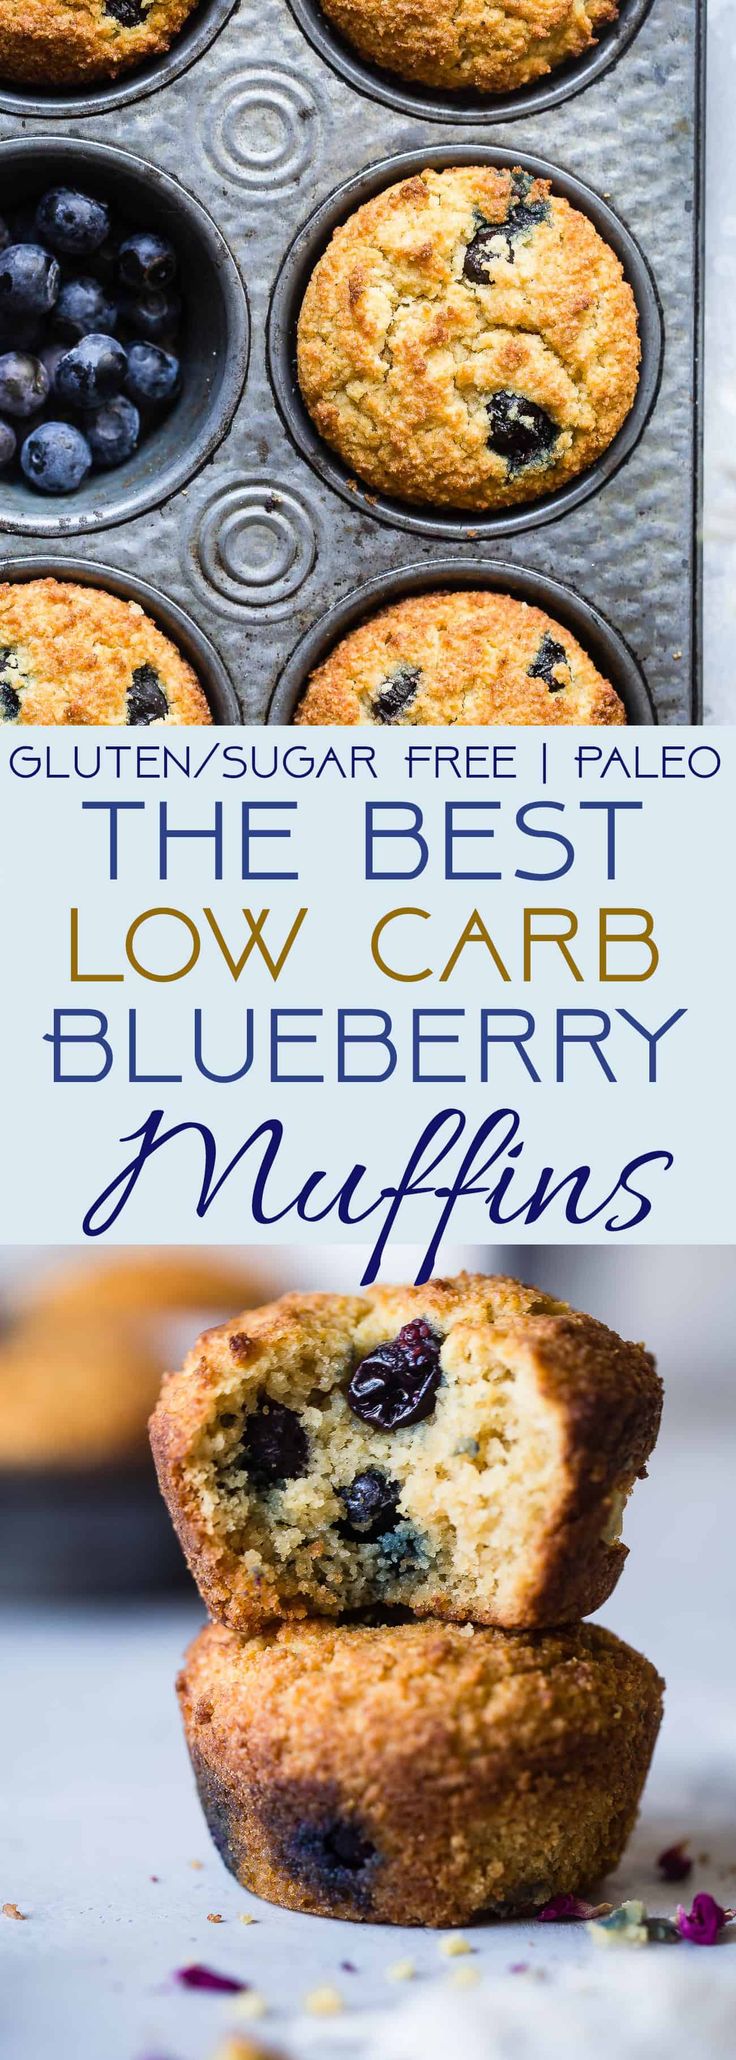 Healthy Recipes : The BEST Low Carb, Sugar Free Blueberry Muffins - SO ...